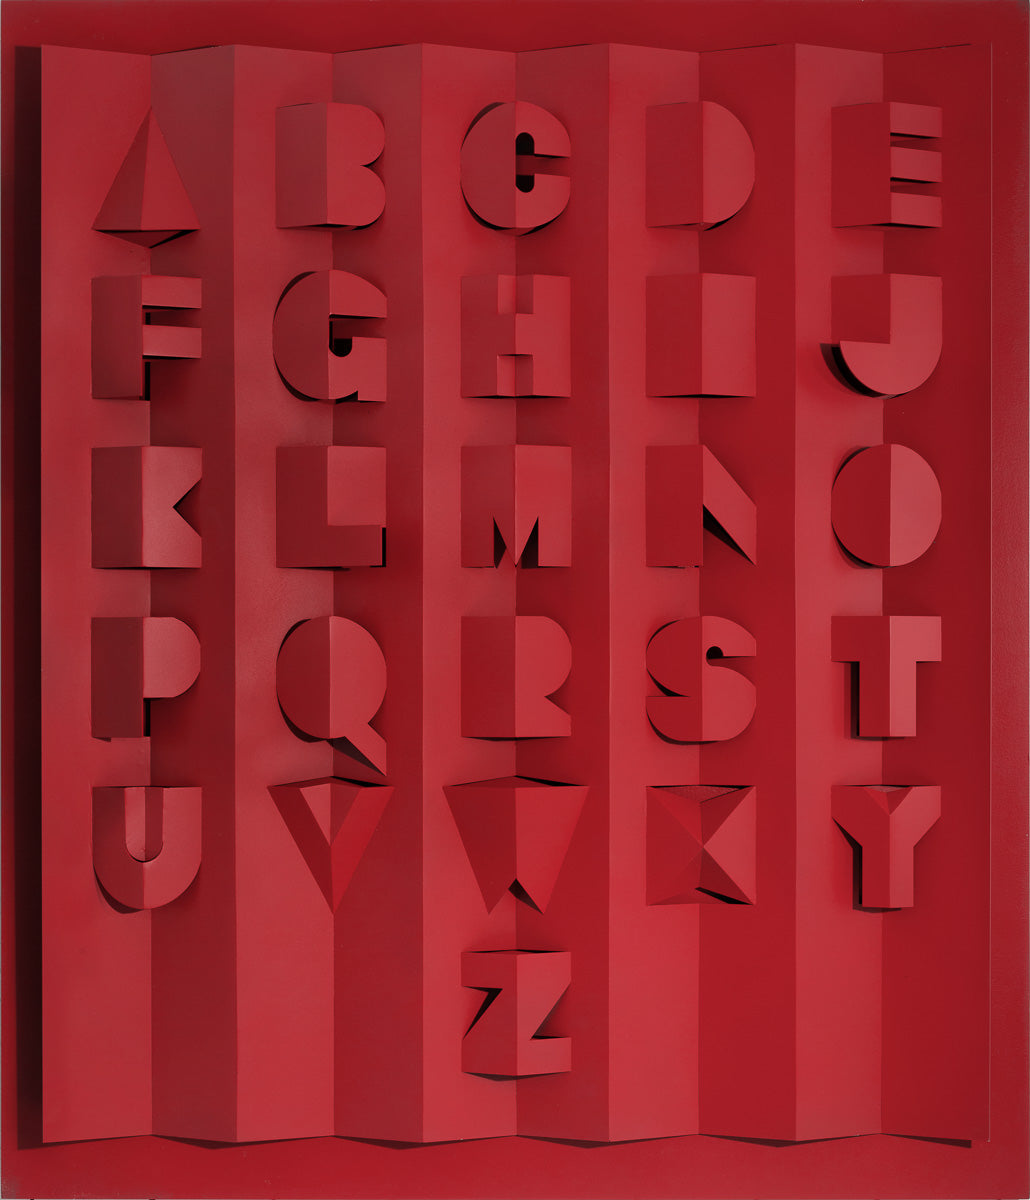 Large Metal Alphabet in Red (edition of 5)